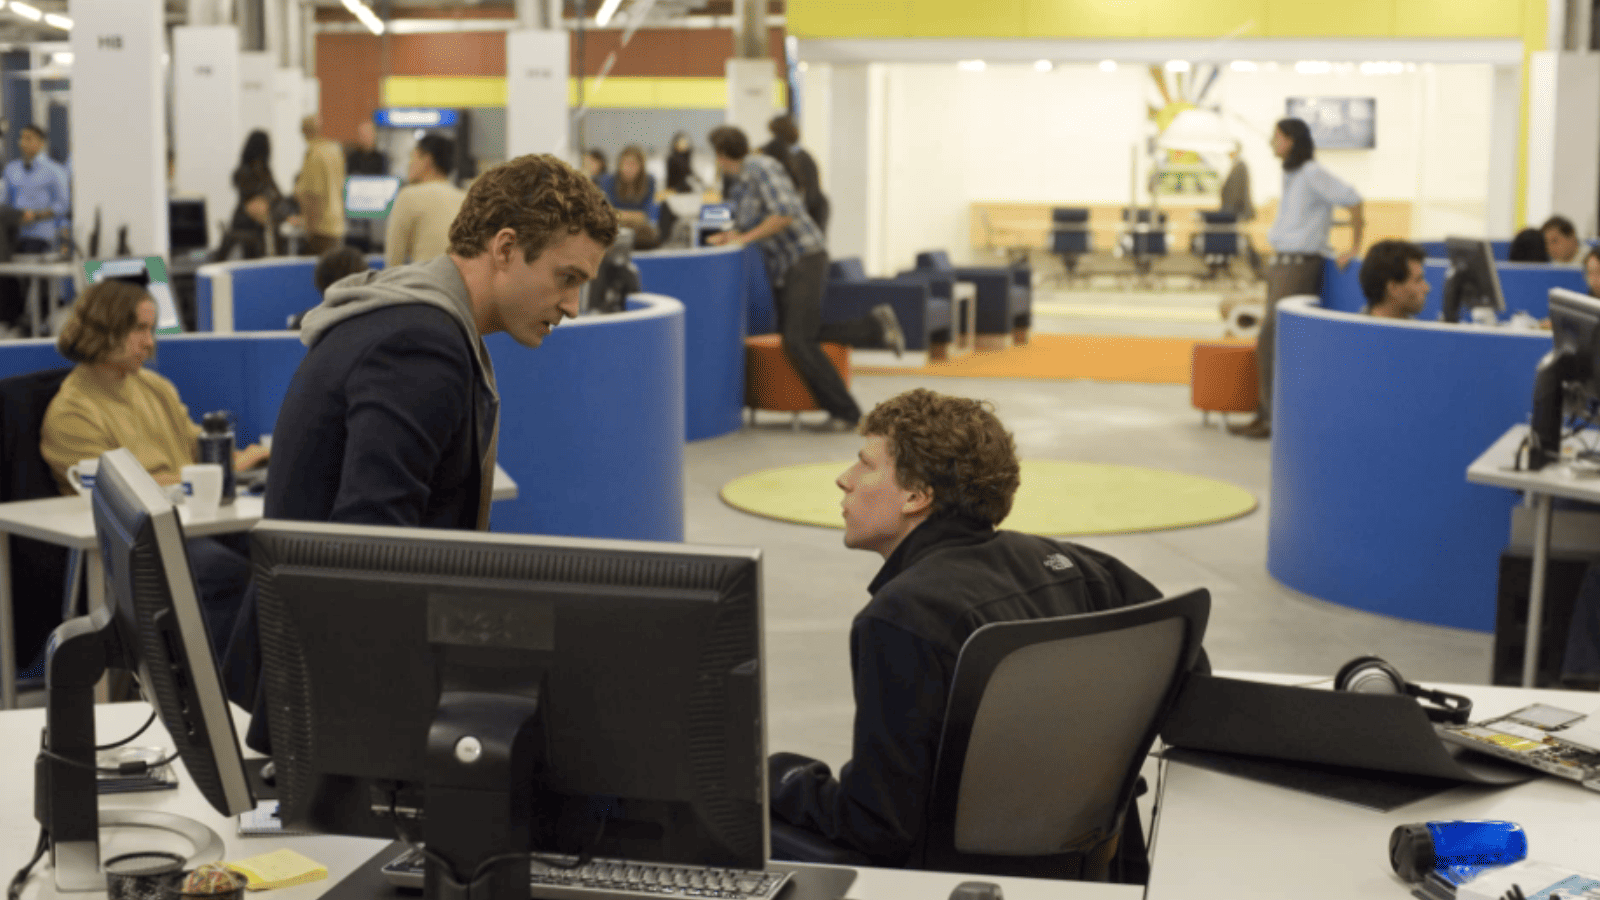 Scene from The Social Network